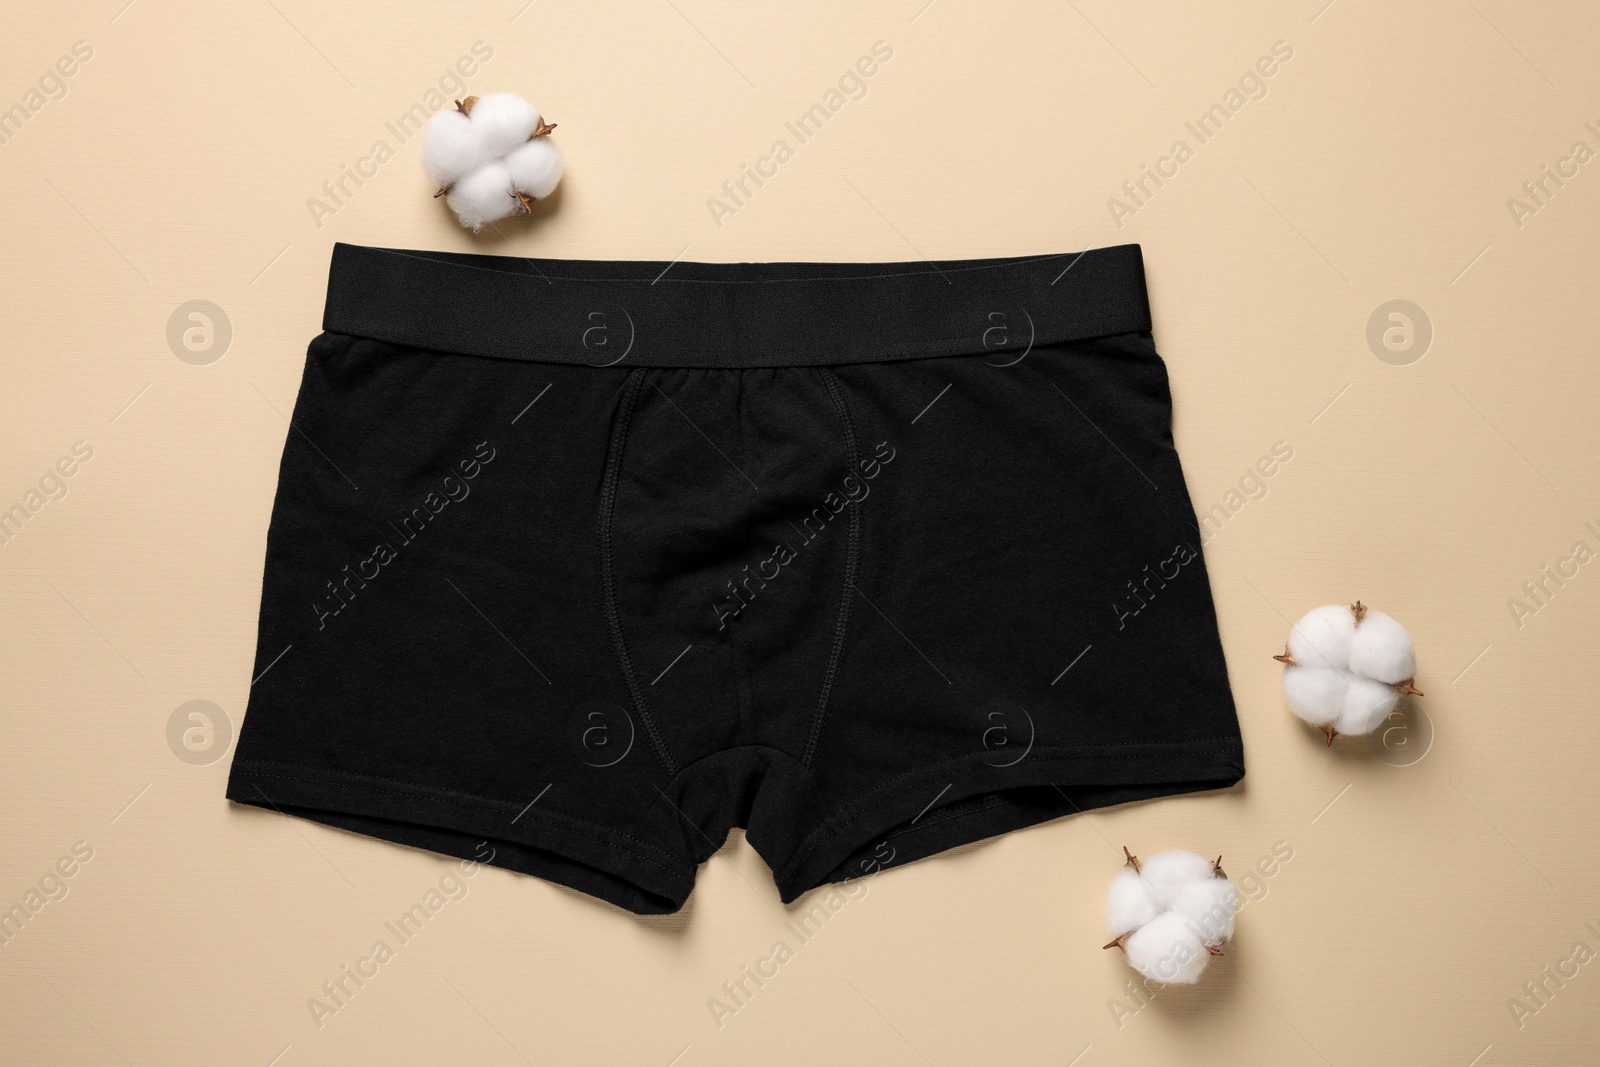 Photo of Comfortable black men's underwear and cotton flowers on beige background, flat lay